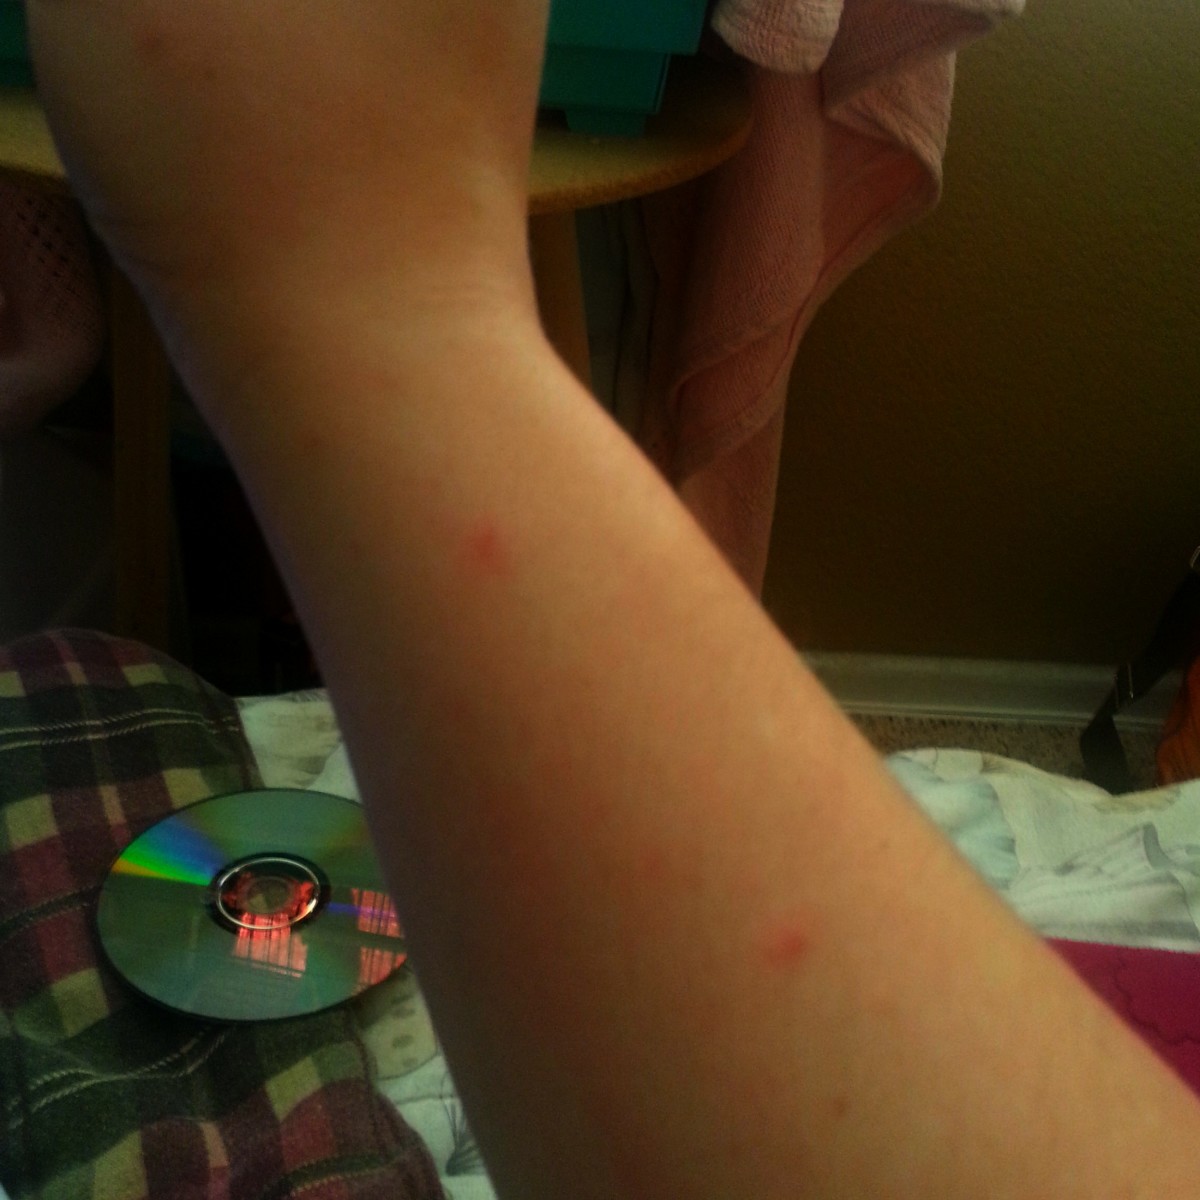 This is my arm during a minor eczema breakout